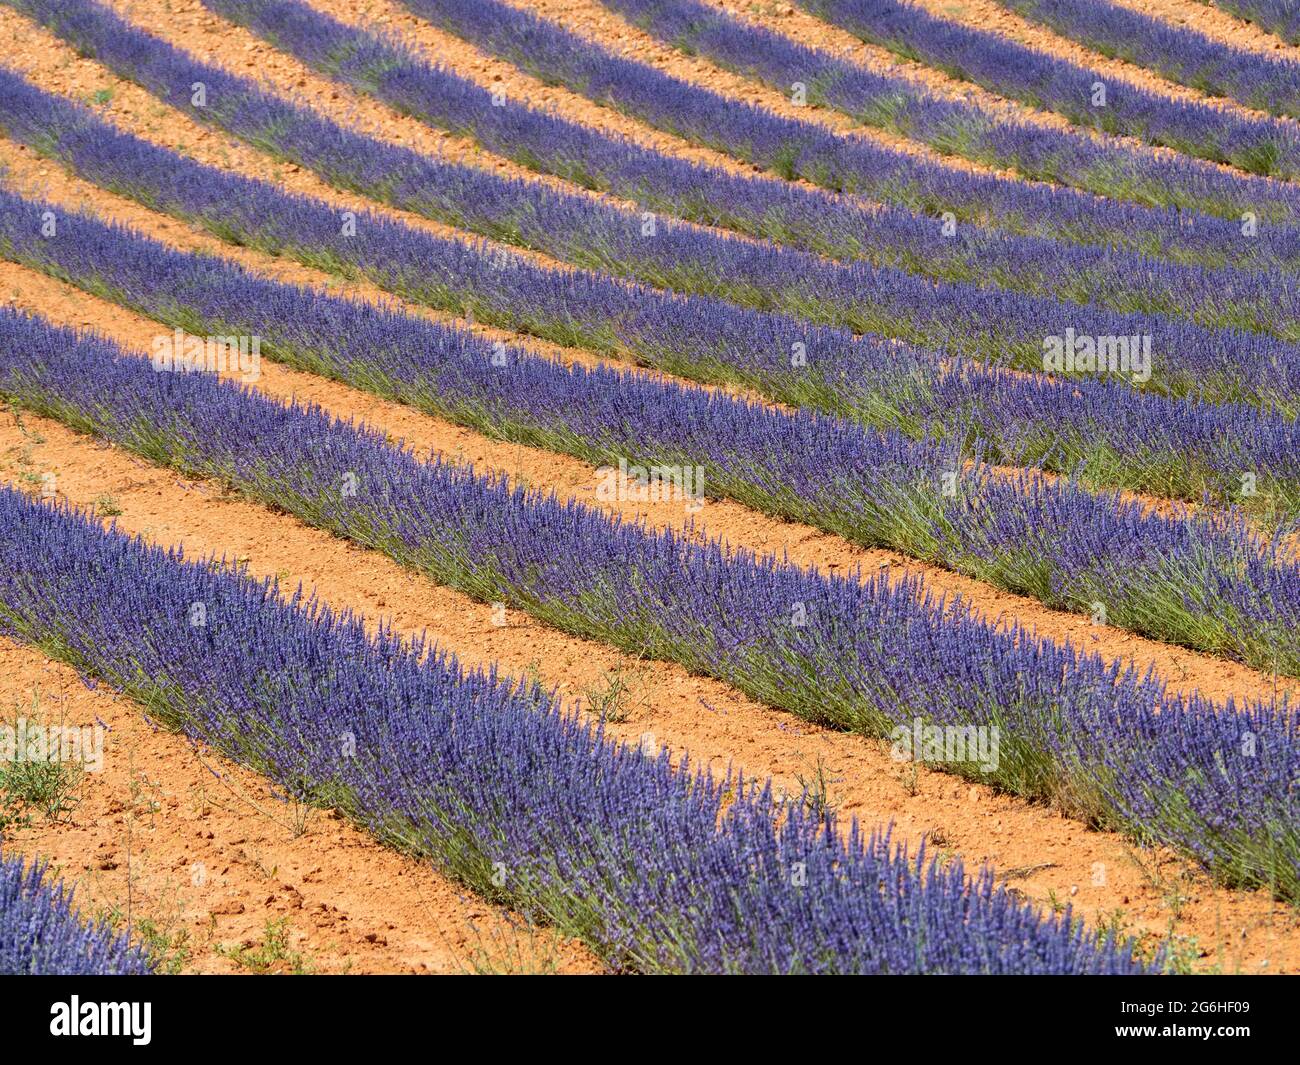 Field with rows of lavender in bloom ready for harvesting Stock Photo